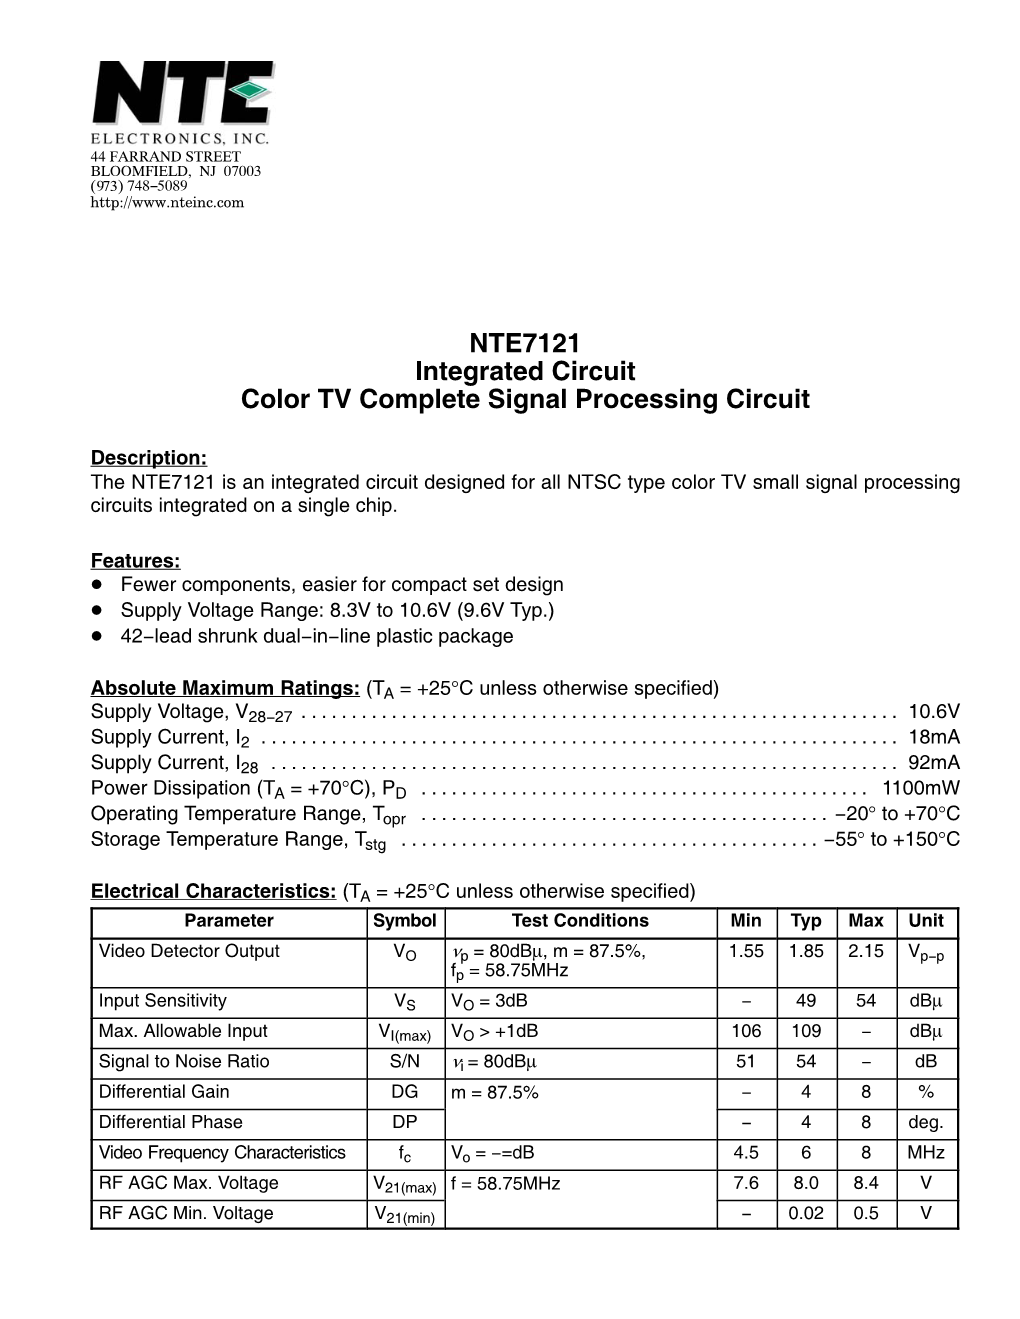 NTE7121 Integrated Circuit Color TV Complete Signal Processing Circuit